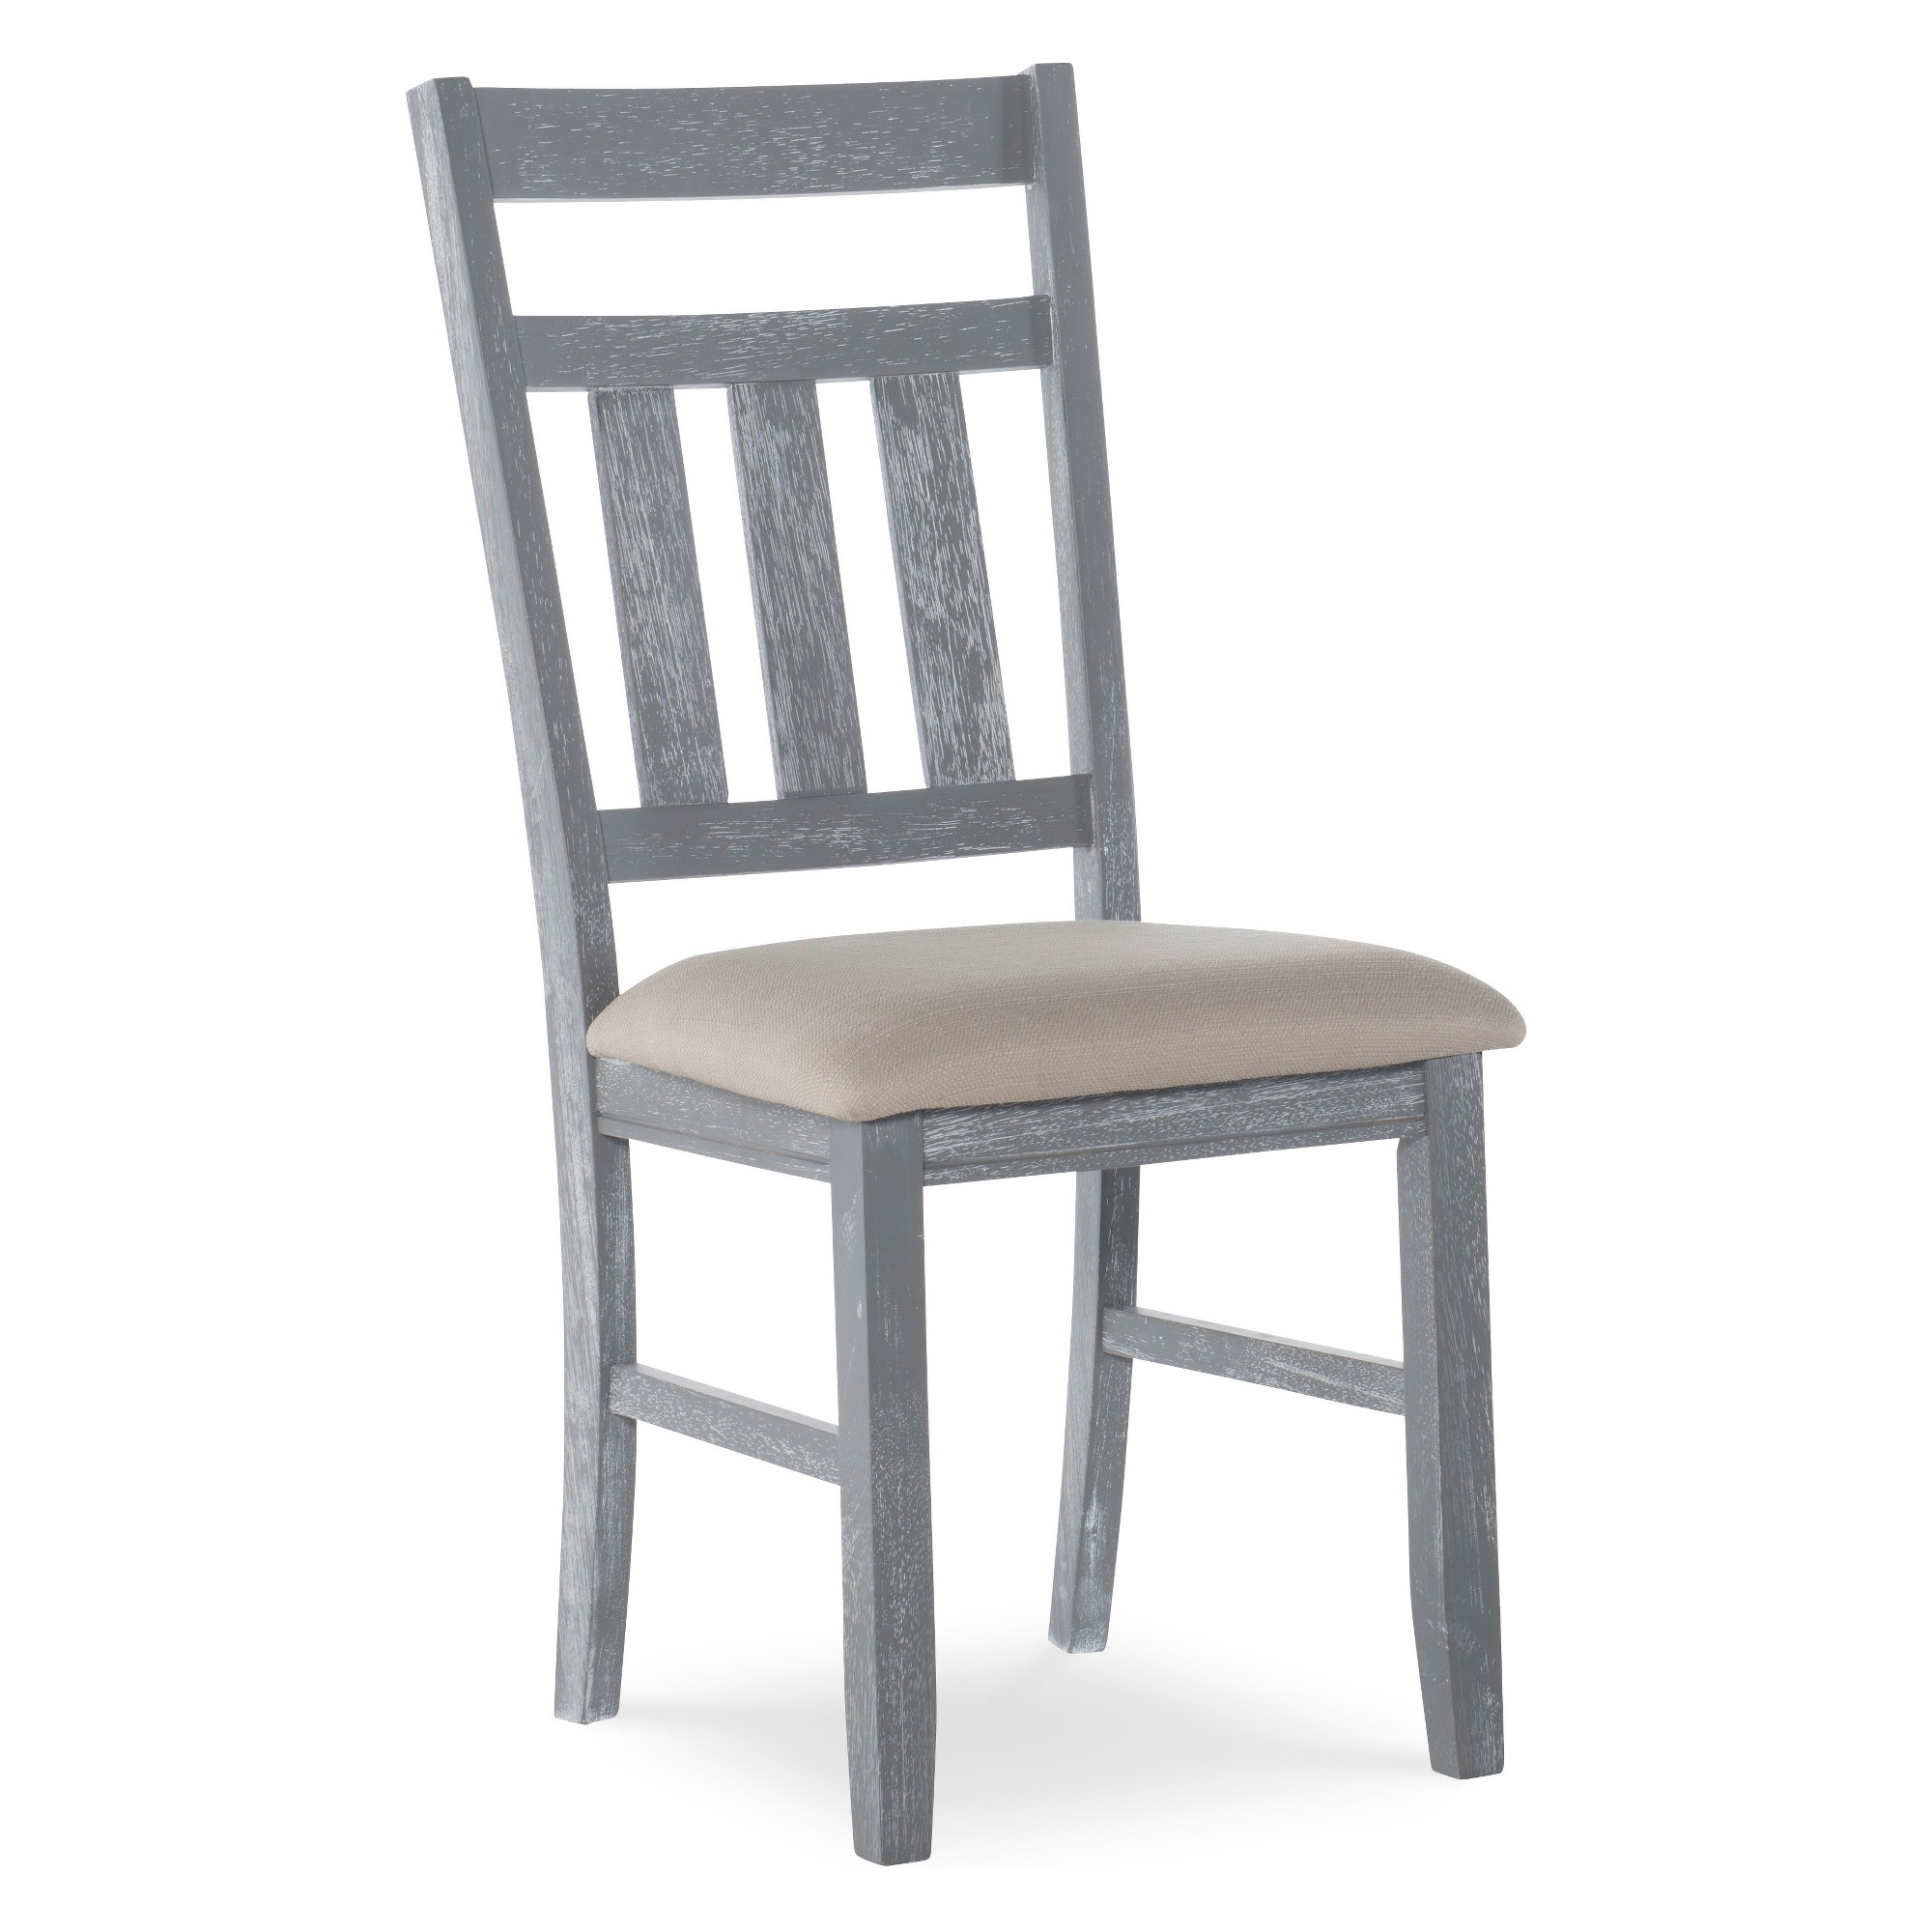 Set of 2 Landon Side Chair Distressed Gray Wash - Powell Company